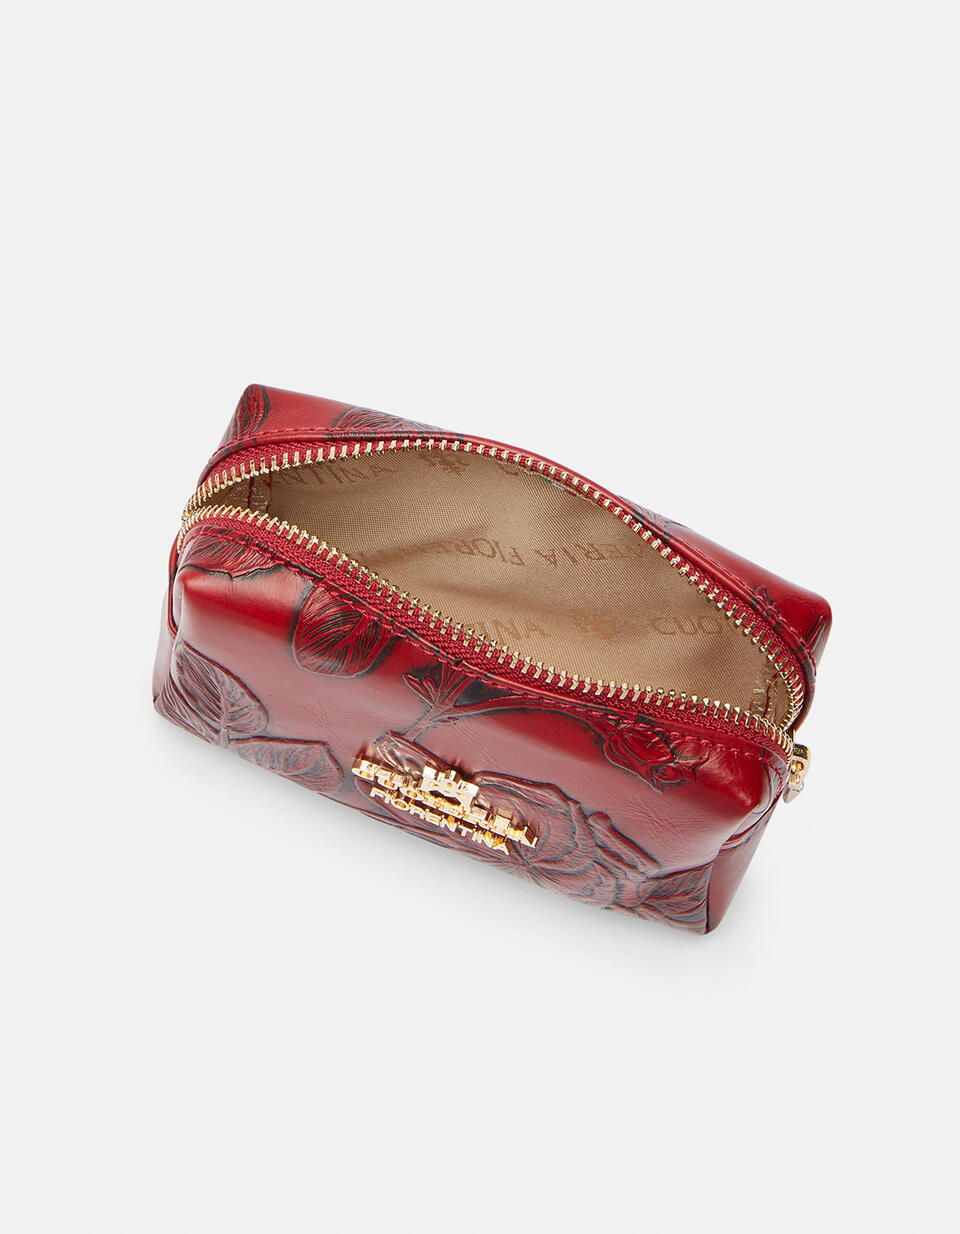 Calfskin printed Beauty-Case - Make Up Bags - Women's Accessories | Accessories Mimì ROSSO - Make Up Bags - Women's Accessories | AccessoriesCuoieria Fiorentina